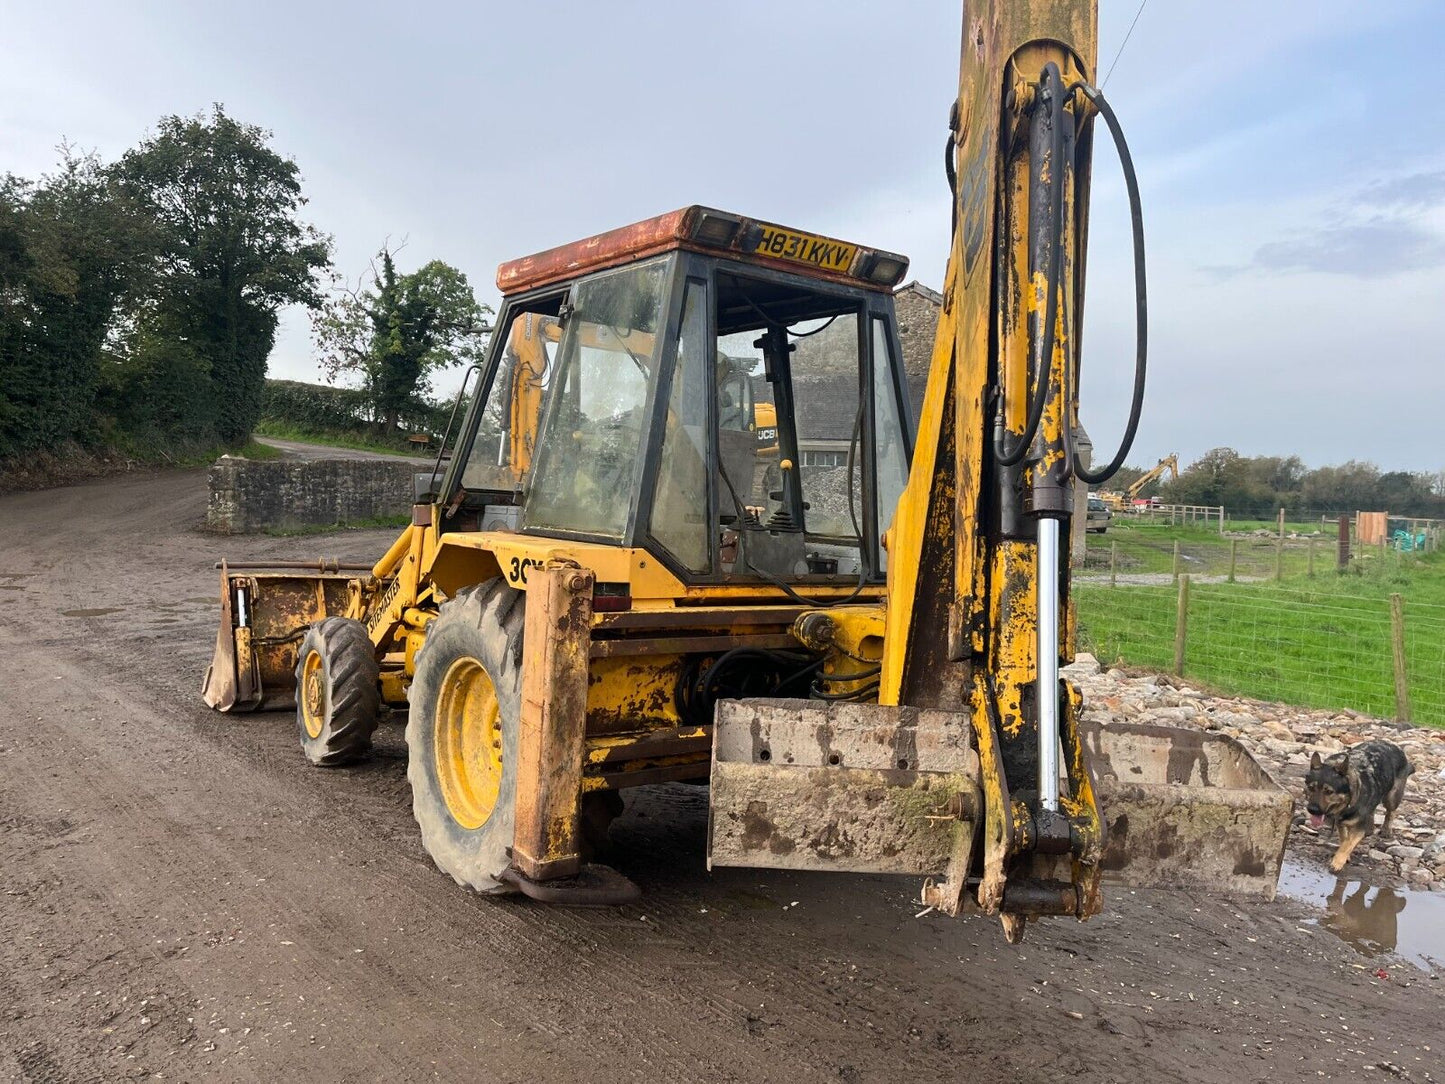 Bid on JCB 3CX 4 WHEEL DRIVE SITEMASTER BACKHOE LOADER- Buy &amp; Sell on Auction with EAMA Group